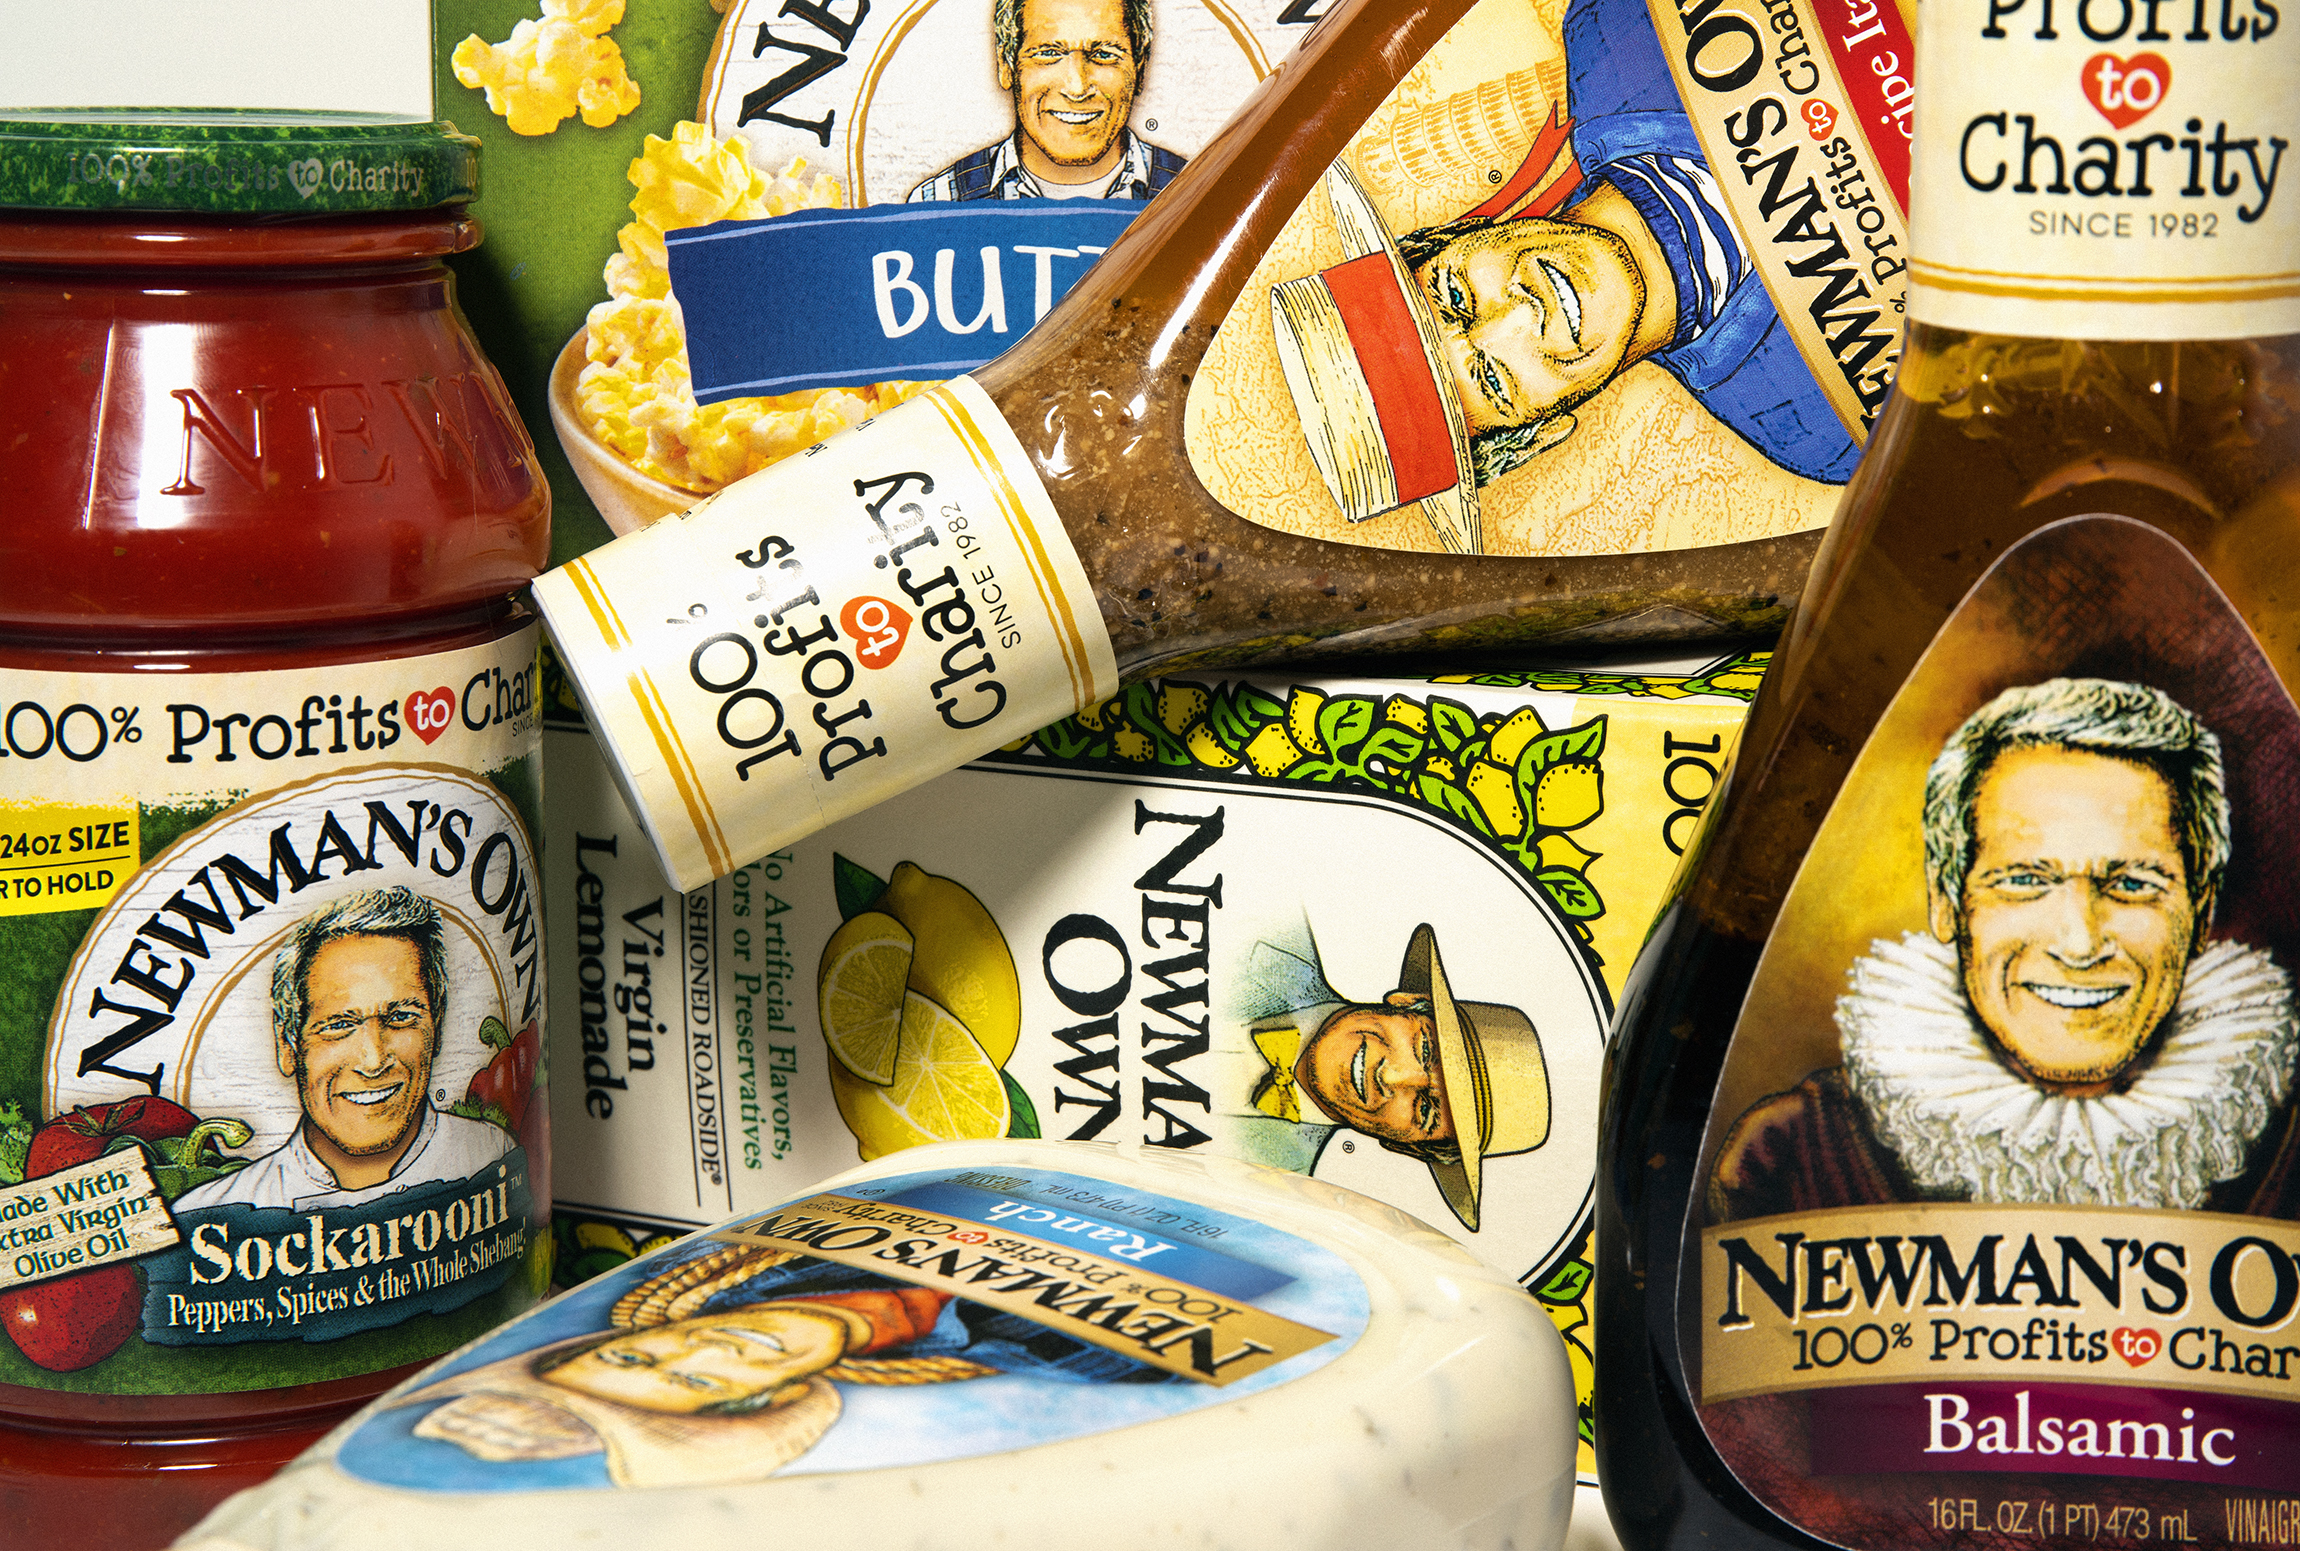 Which Movie Legend Donated The Profit From The Sale Of His Salad Dressings To Charity?